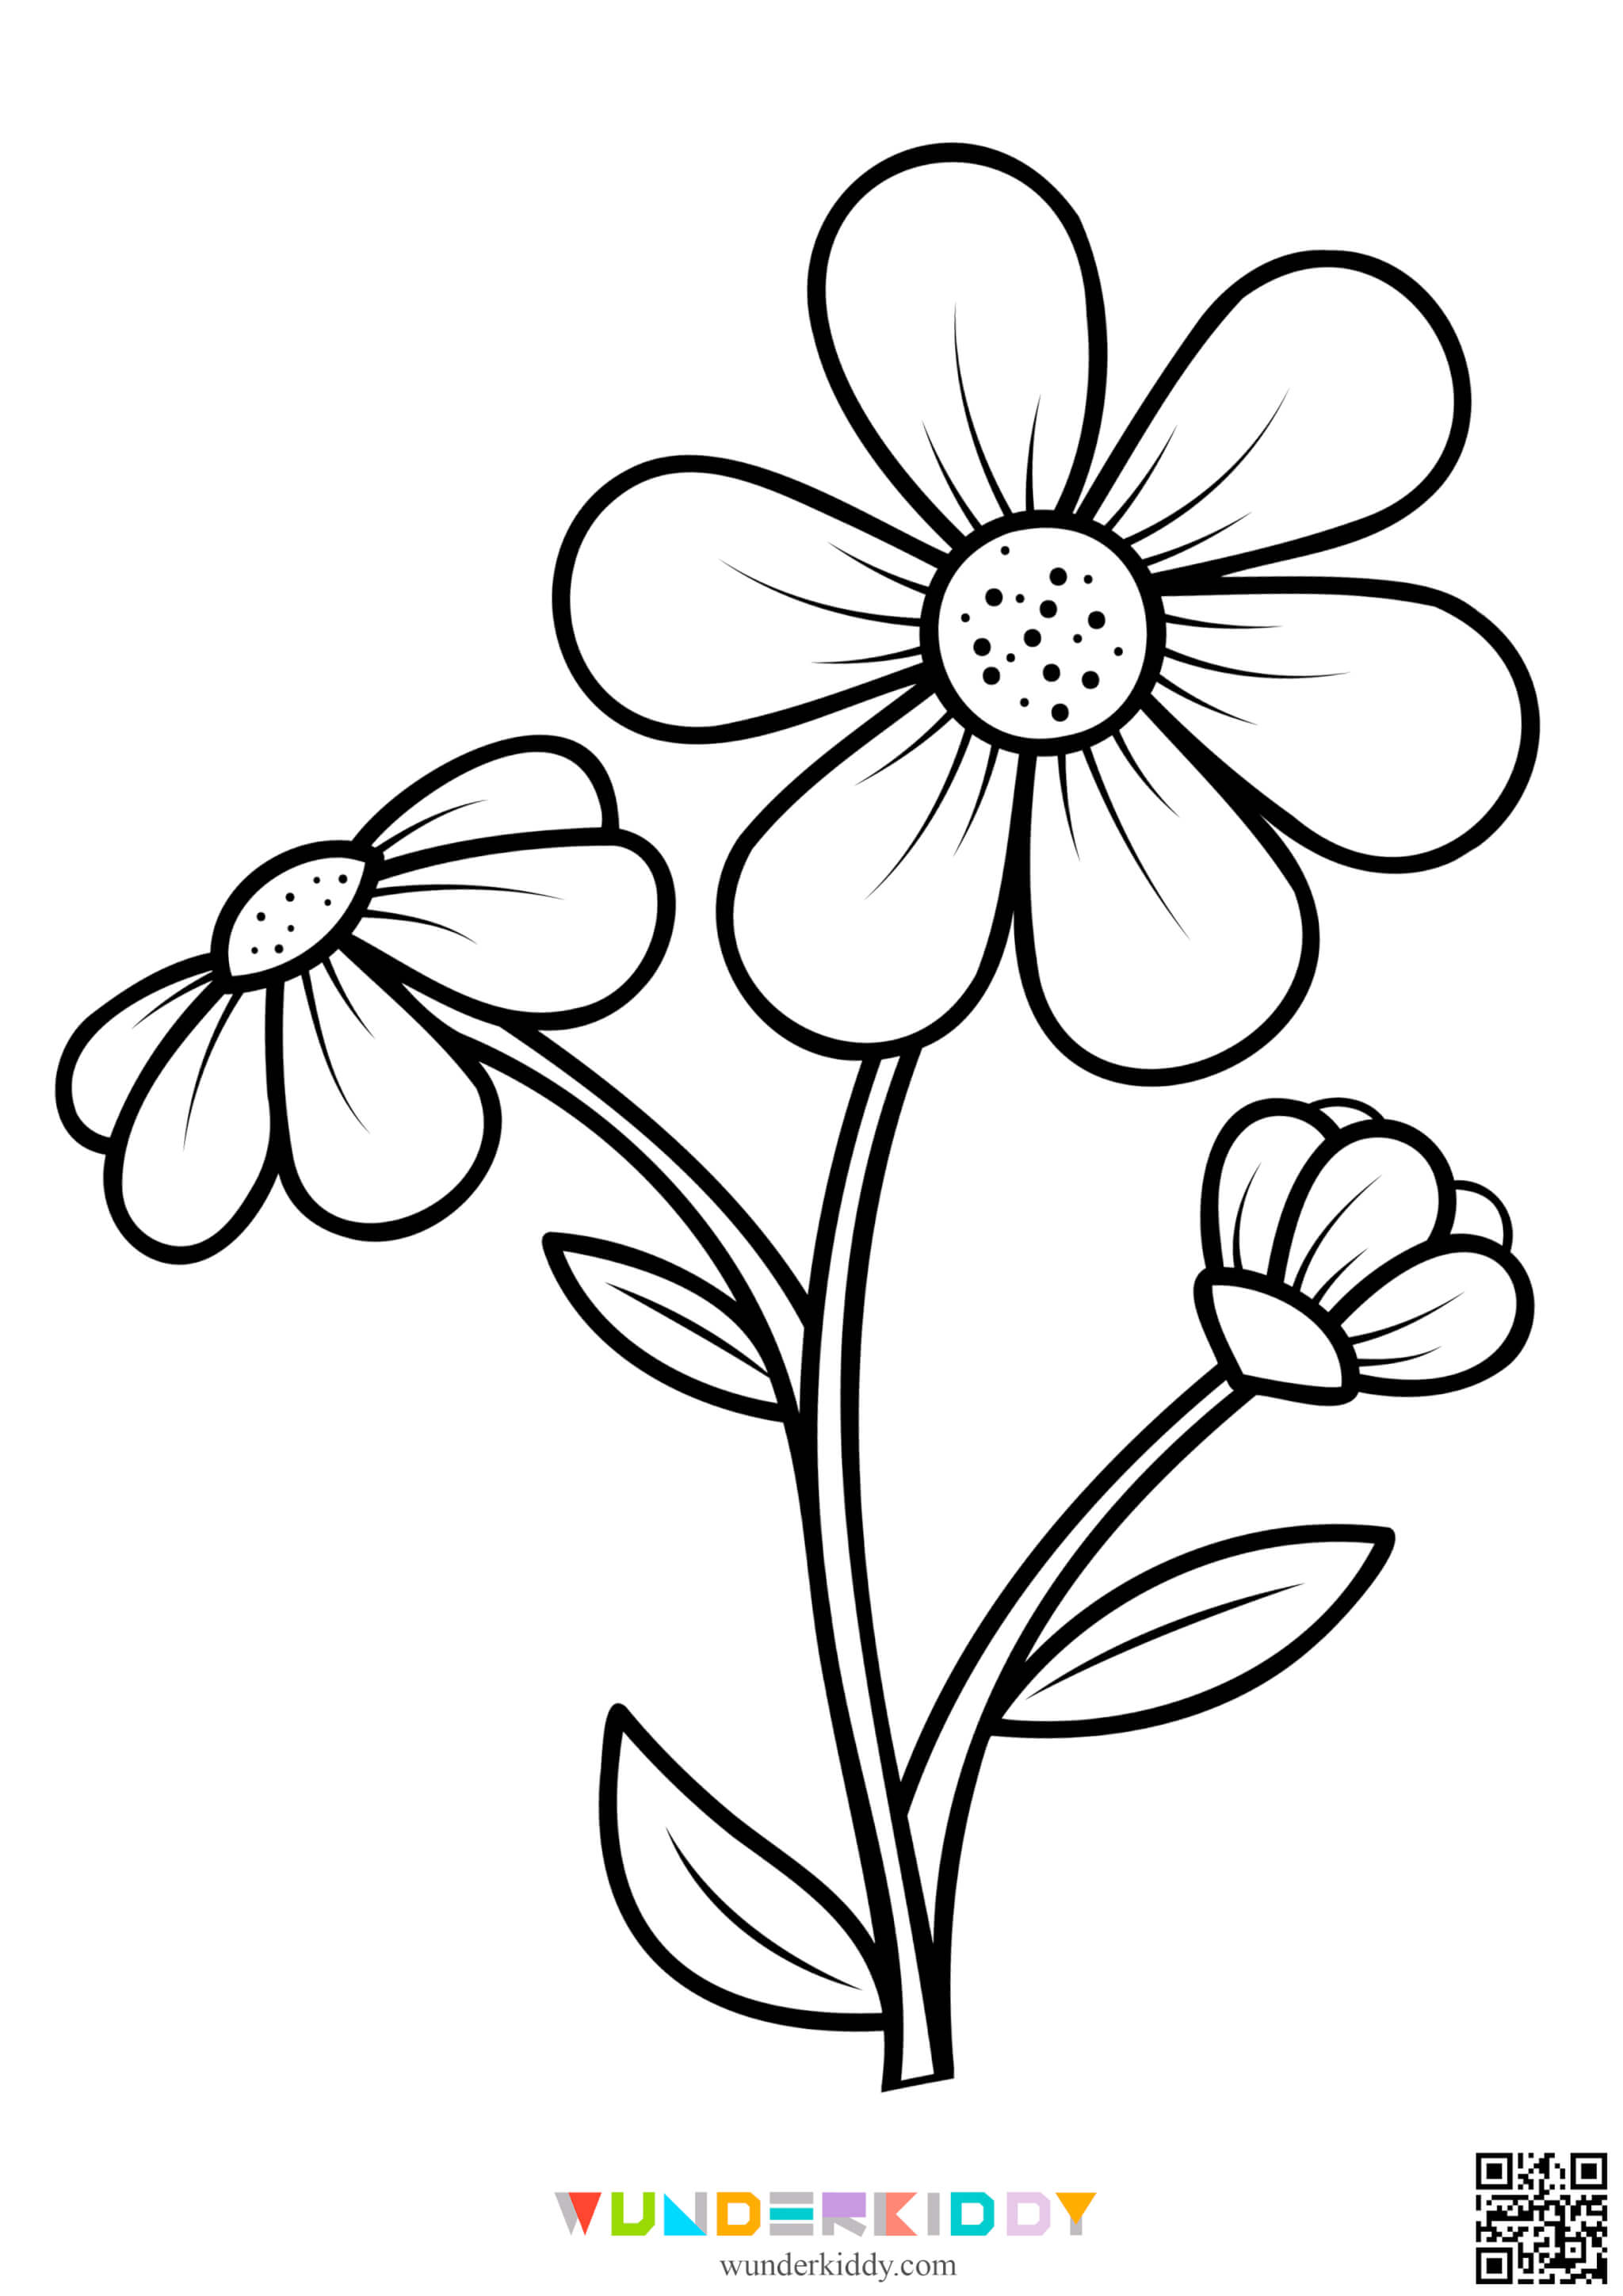 Flower Printable Coloring Pages - Image 2